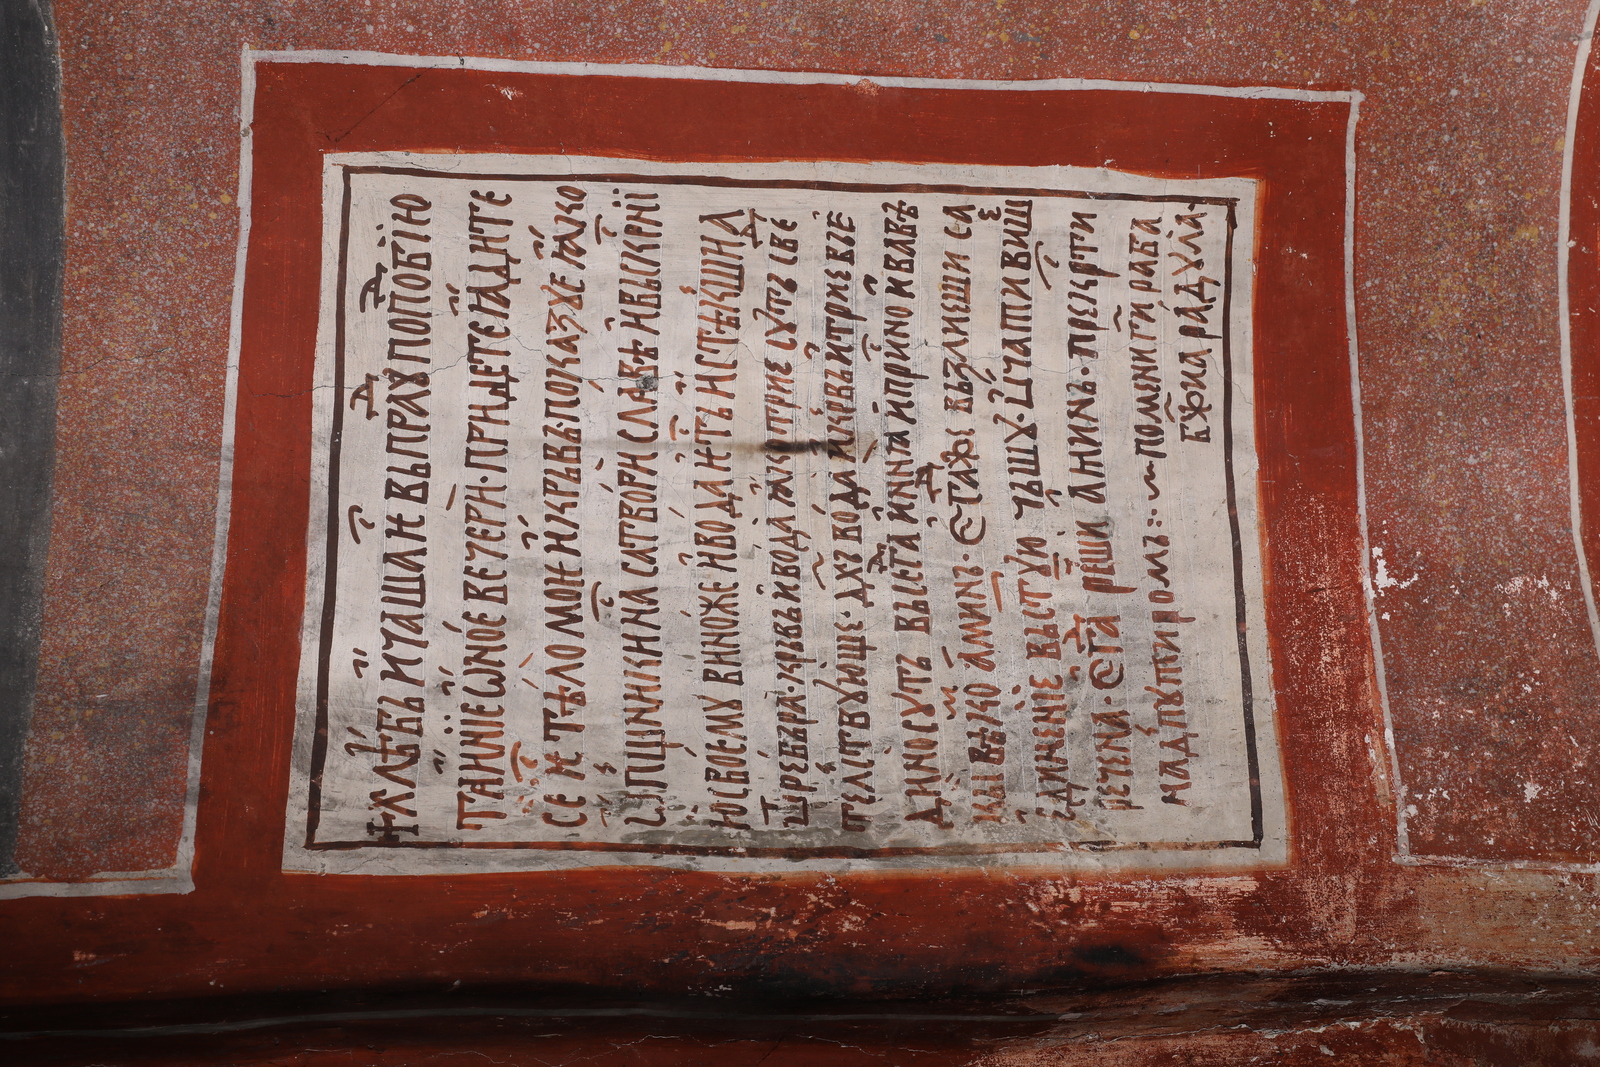 Inscription with the Text about the Preparation of the Eucharist and the Name of the Painter Radul at the End